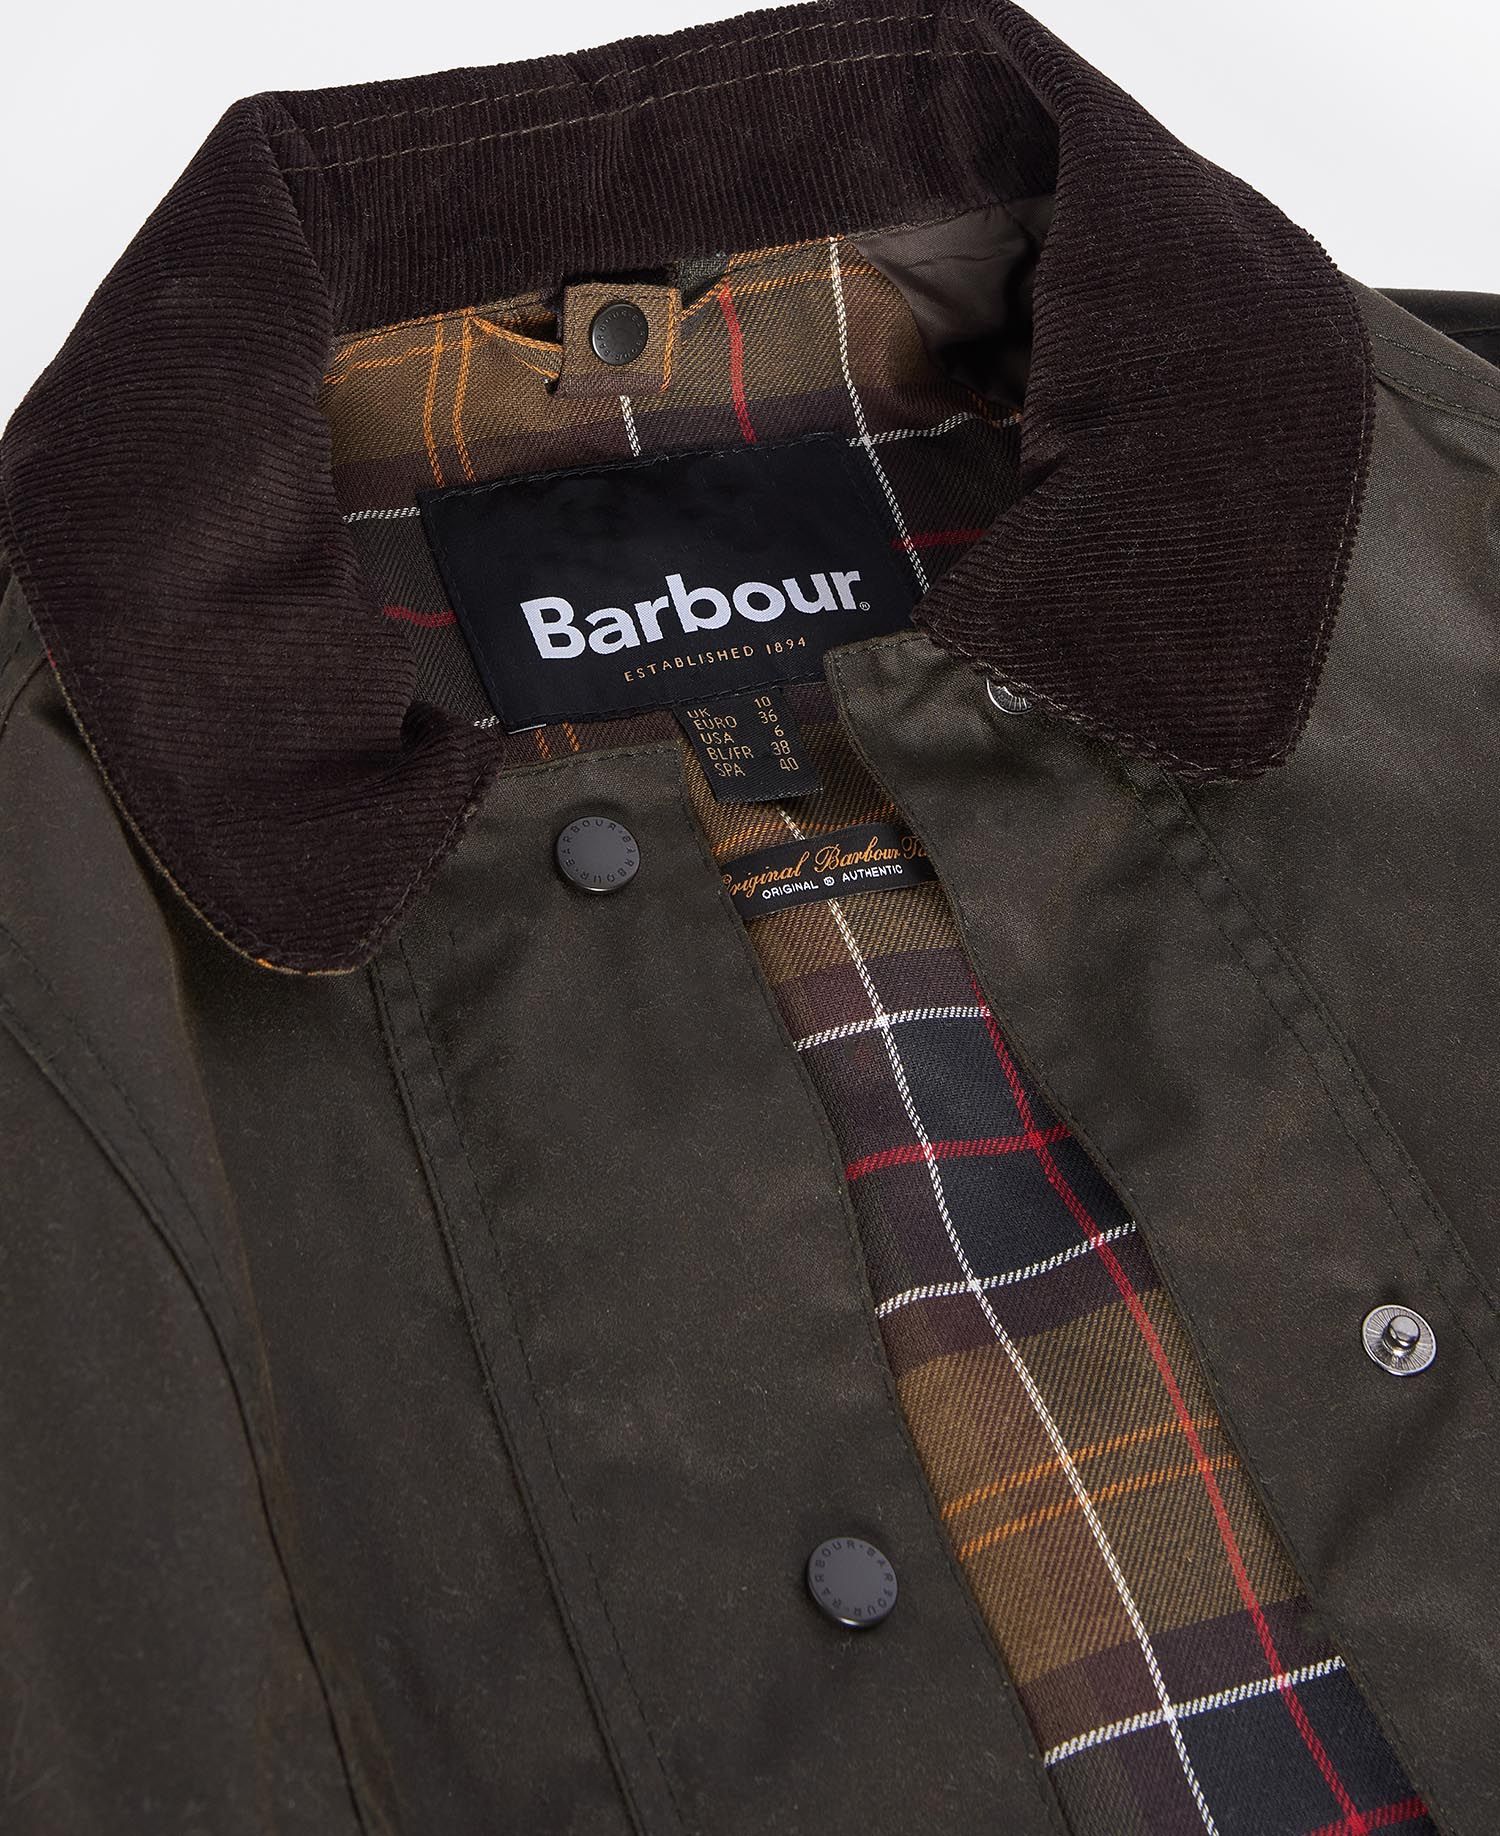 Barbour Classic Beadnell Wax Jacket in Olive | Barbour